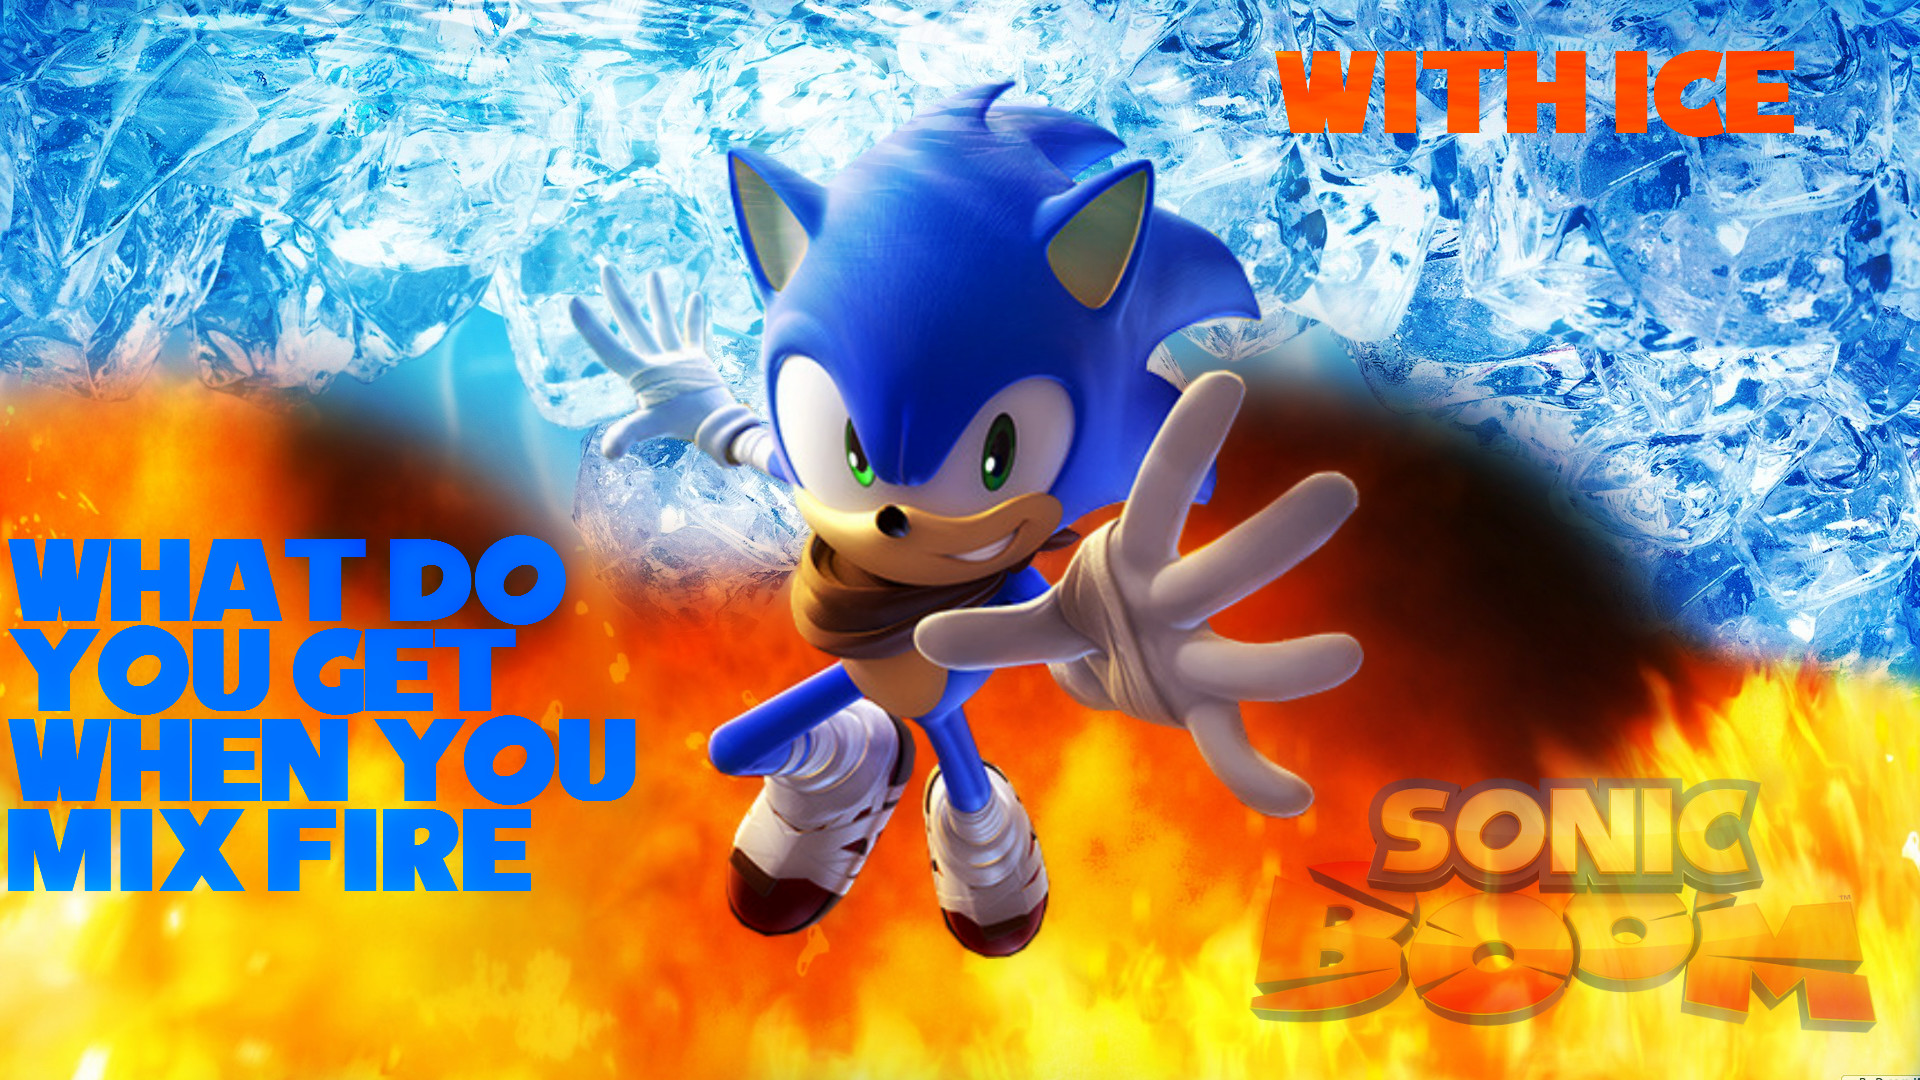 1920x1080 ... Wallpaper - Sonic Boom: Fire and Ice (#1) by Haalyle